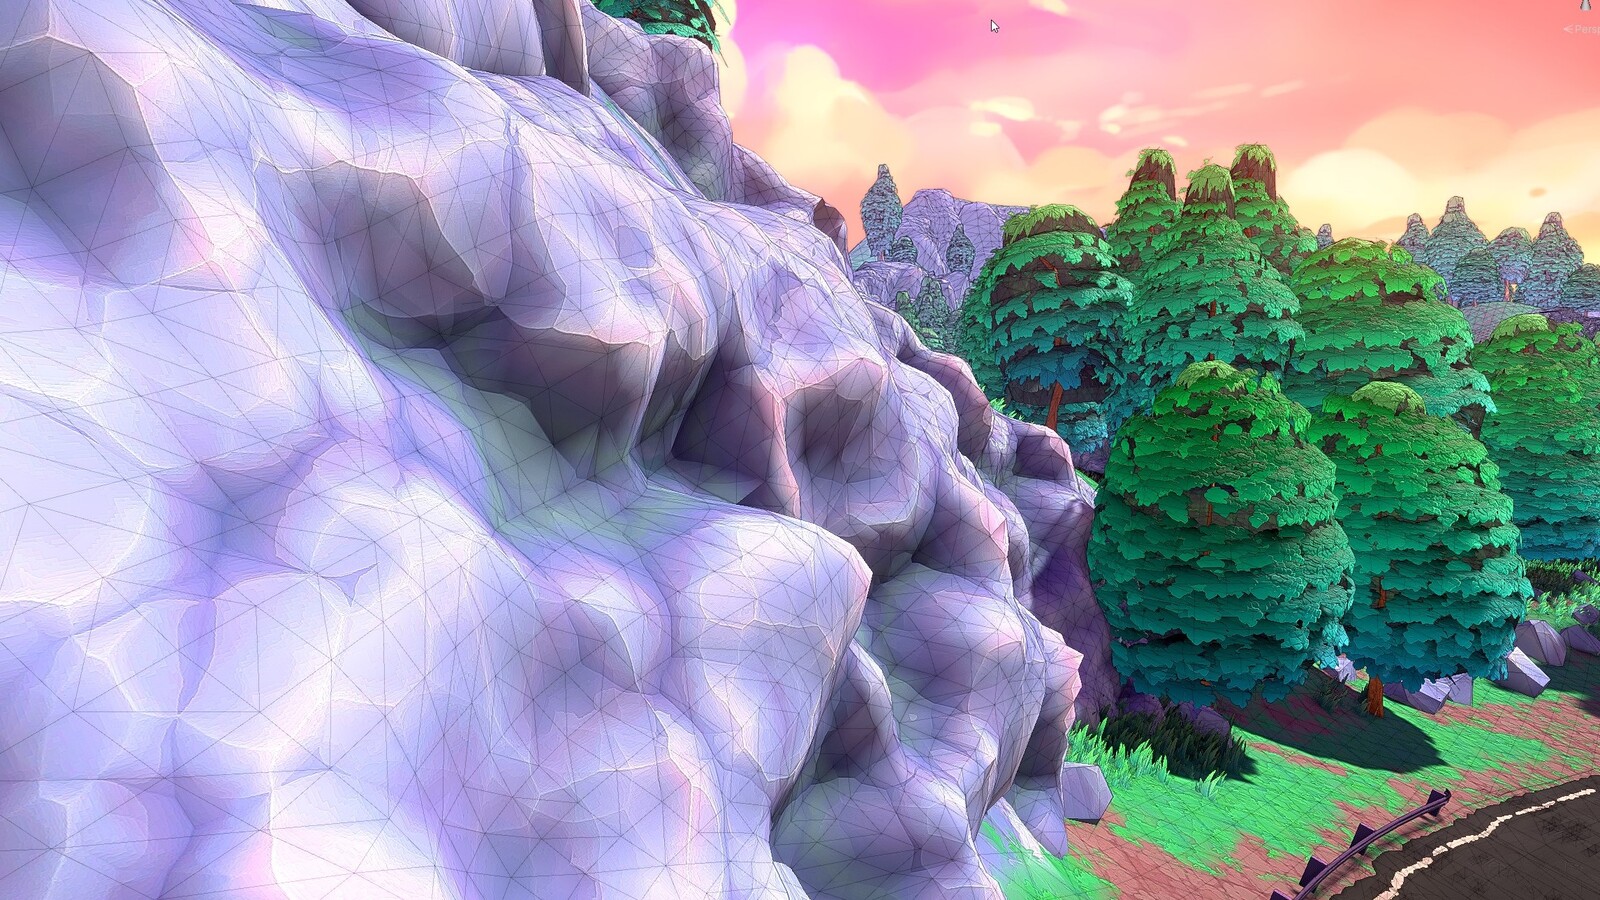 Wireframe - Rock Cliff Meshes are procedurally generated from terrain (not prefabs), lower resolution by distance.